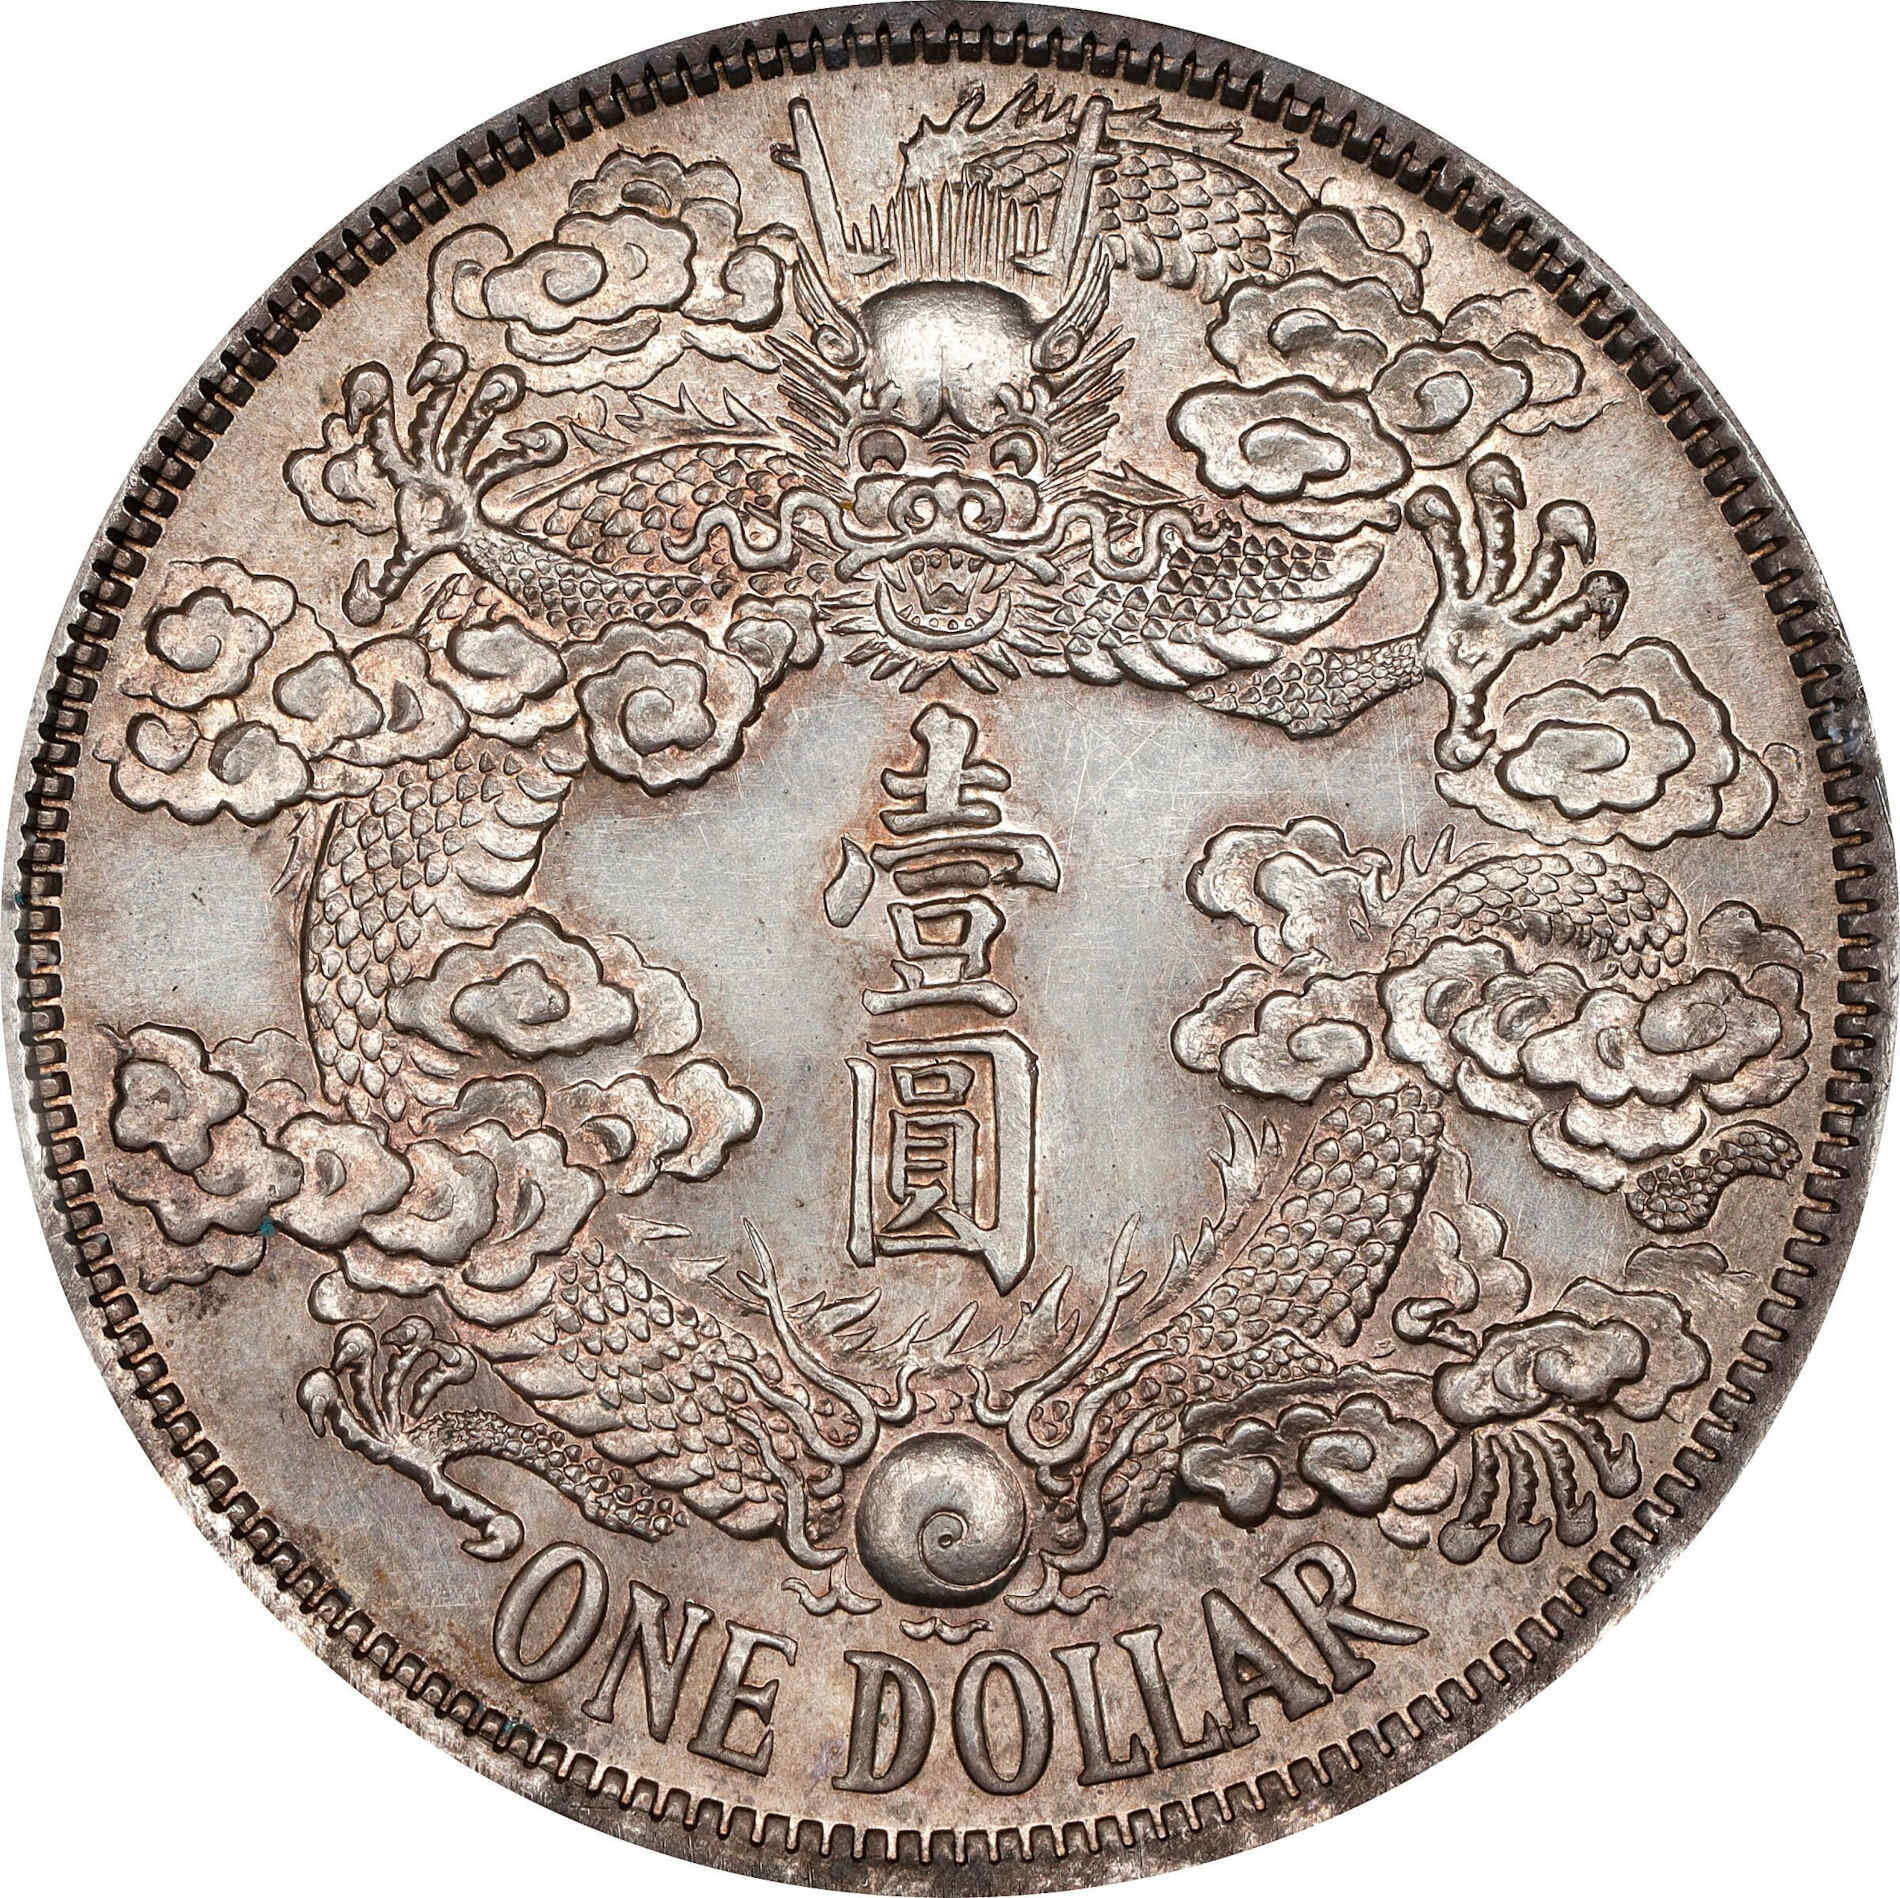 Stack's Bowers and Ponterio Achieves Strong Results in their April Hong  Kong Rarities Night Coin & Banknote Sale